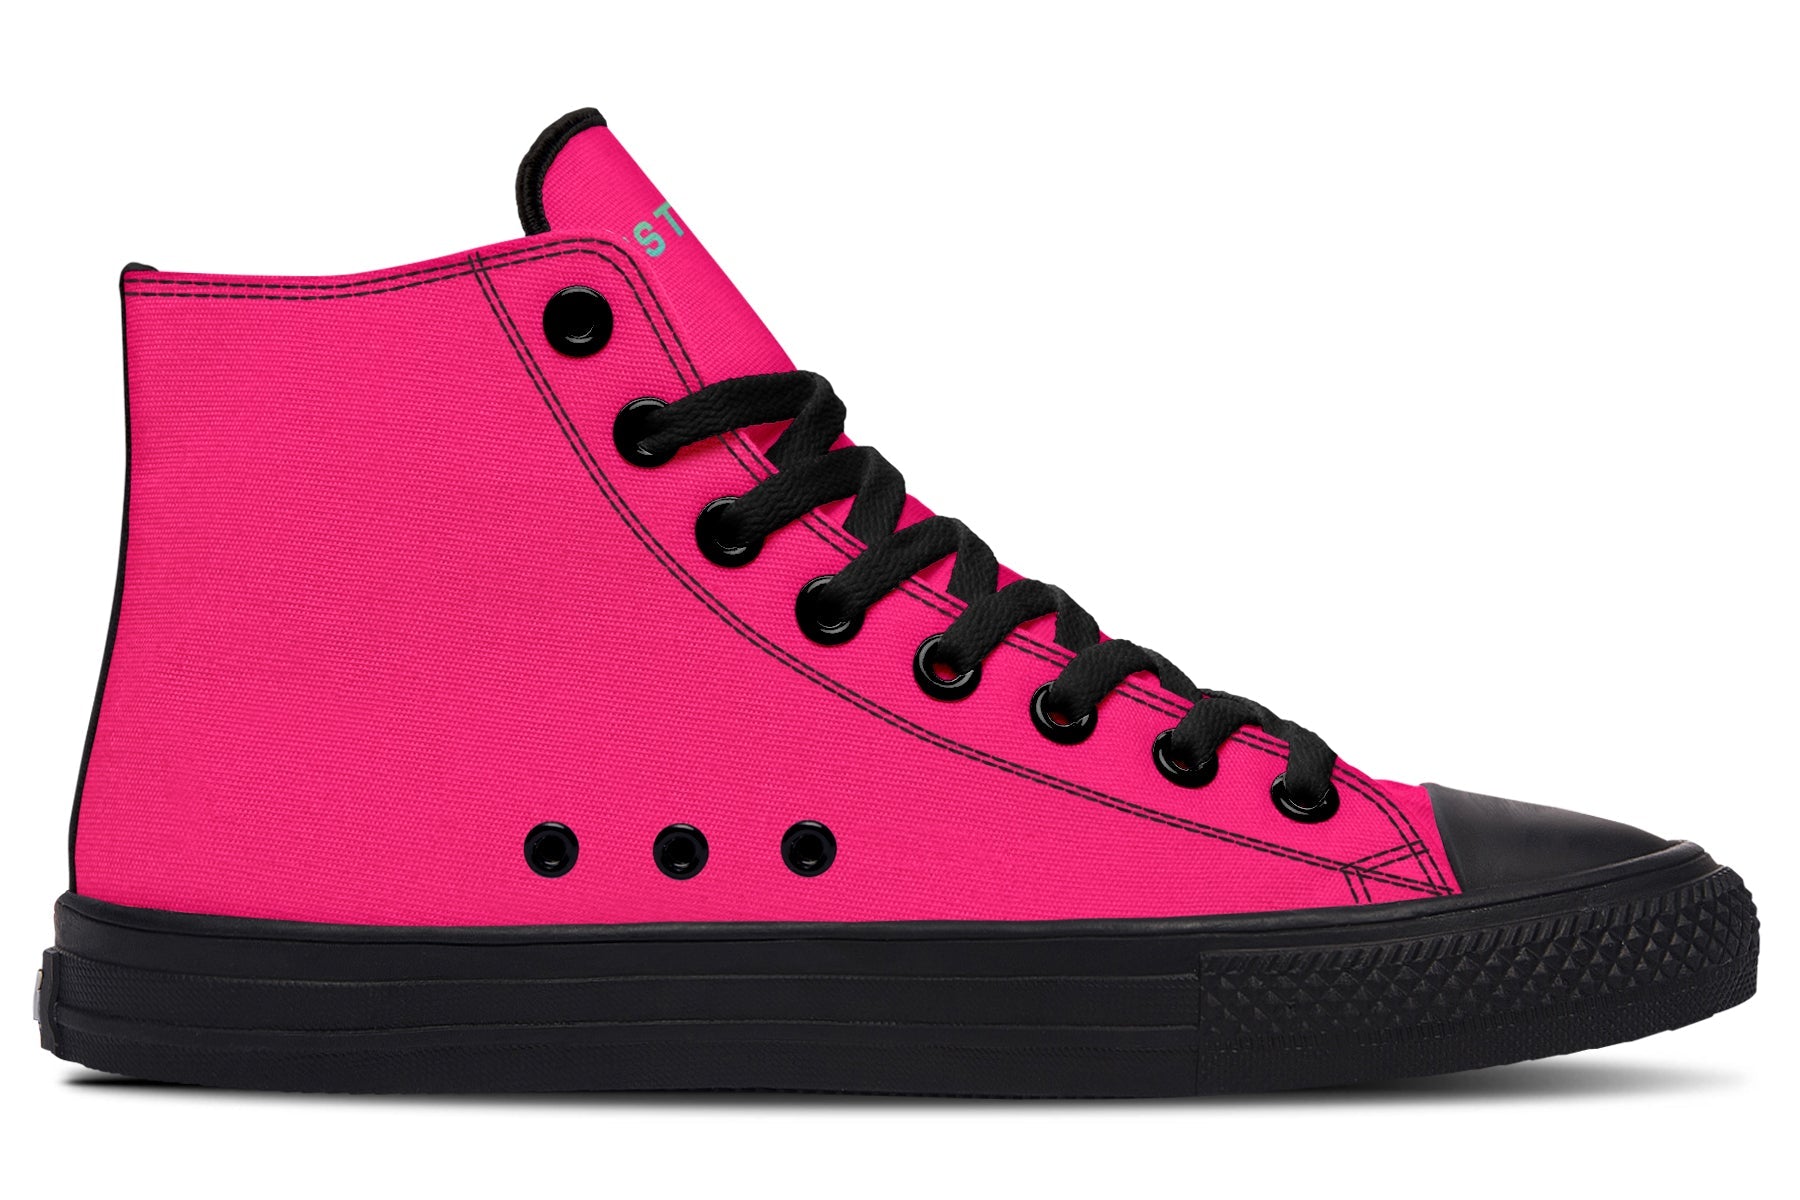 Unisex High Tops Bright Pink